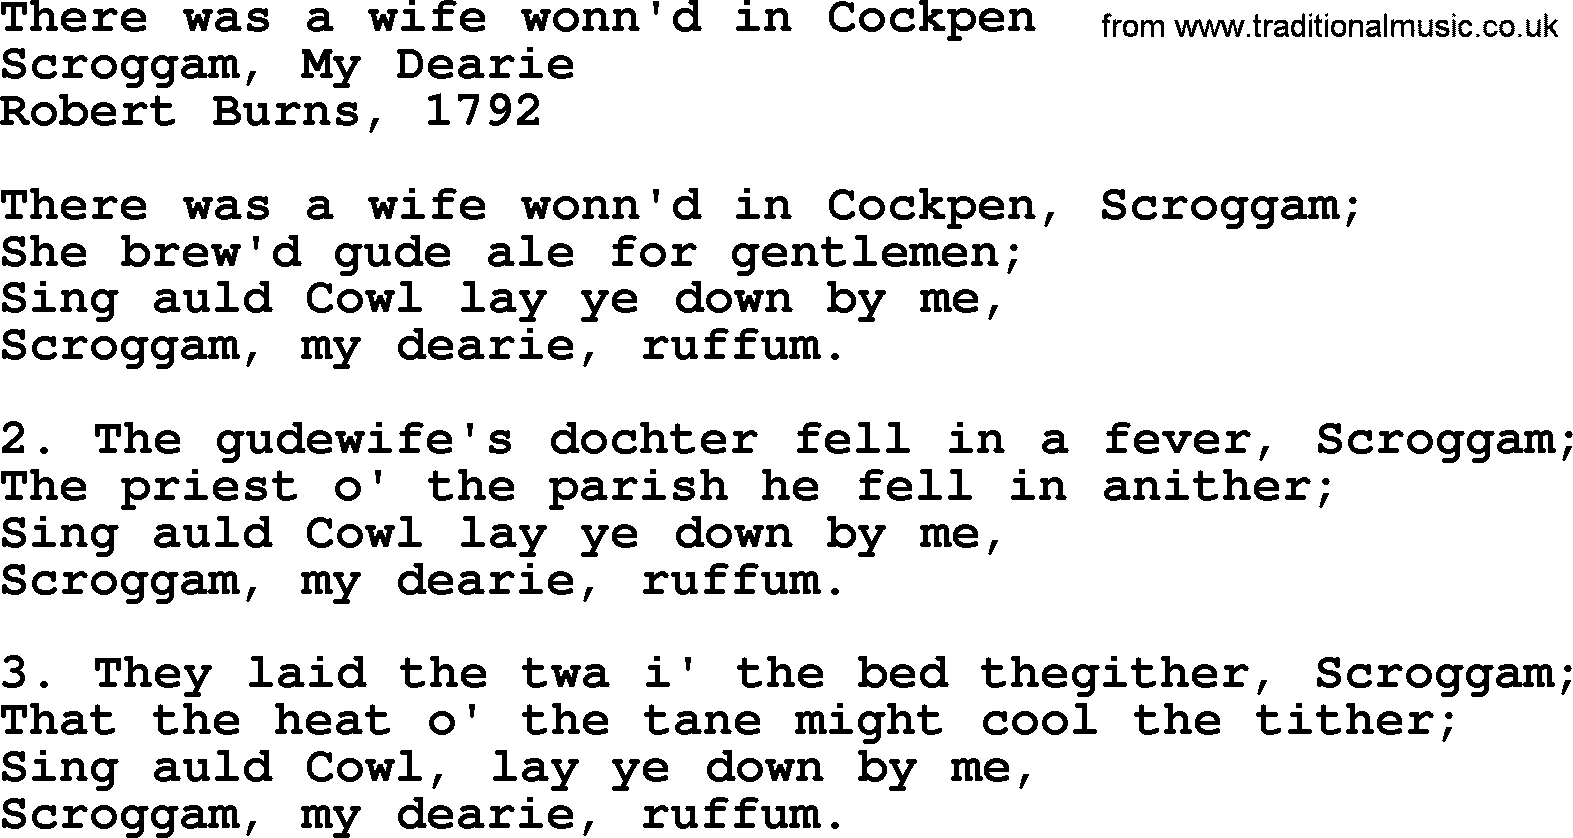 Robert Burns Songs & Lyrics: There Was A Wife Wonn'd In Cockpen